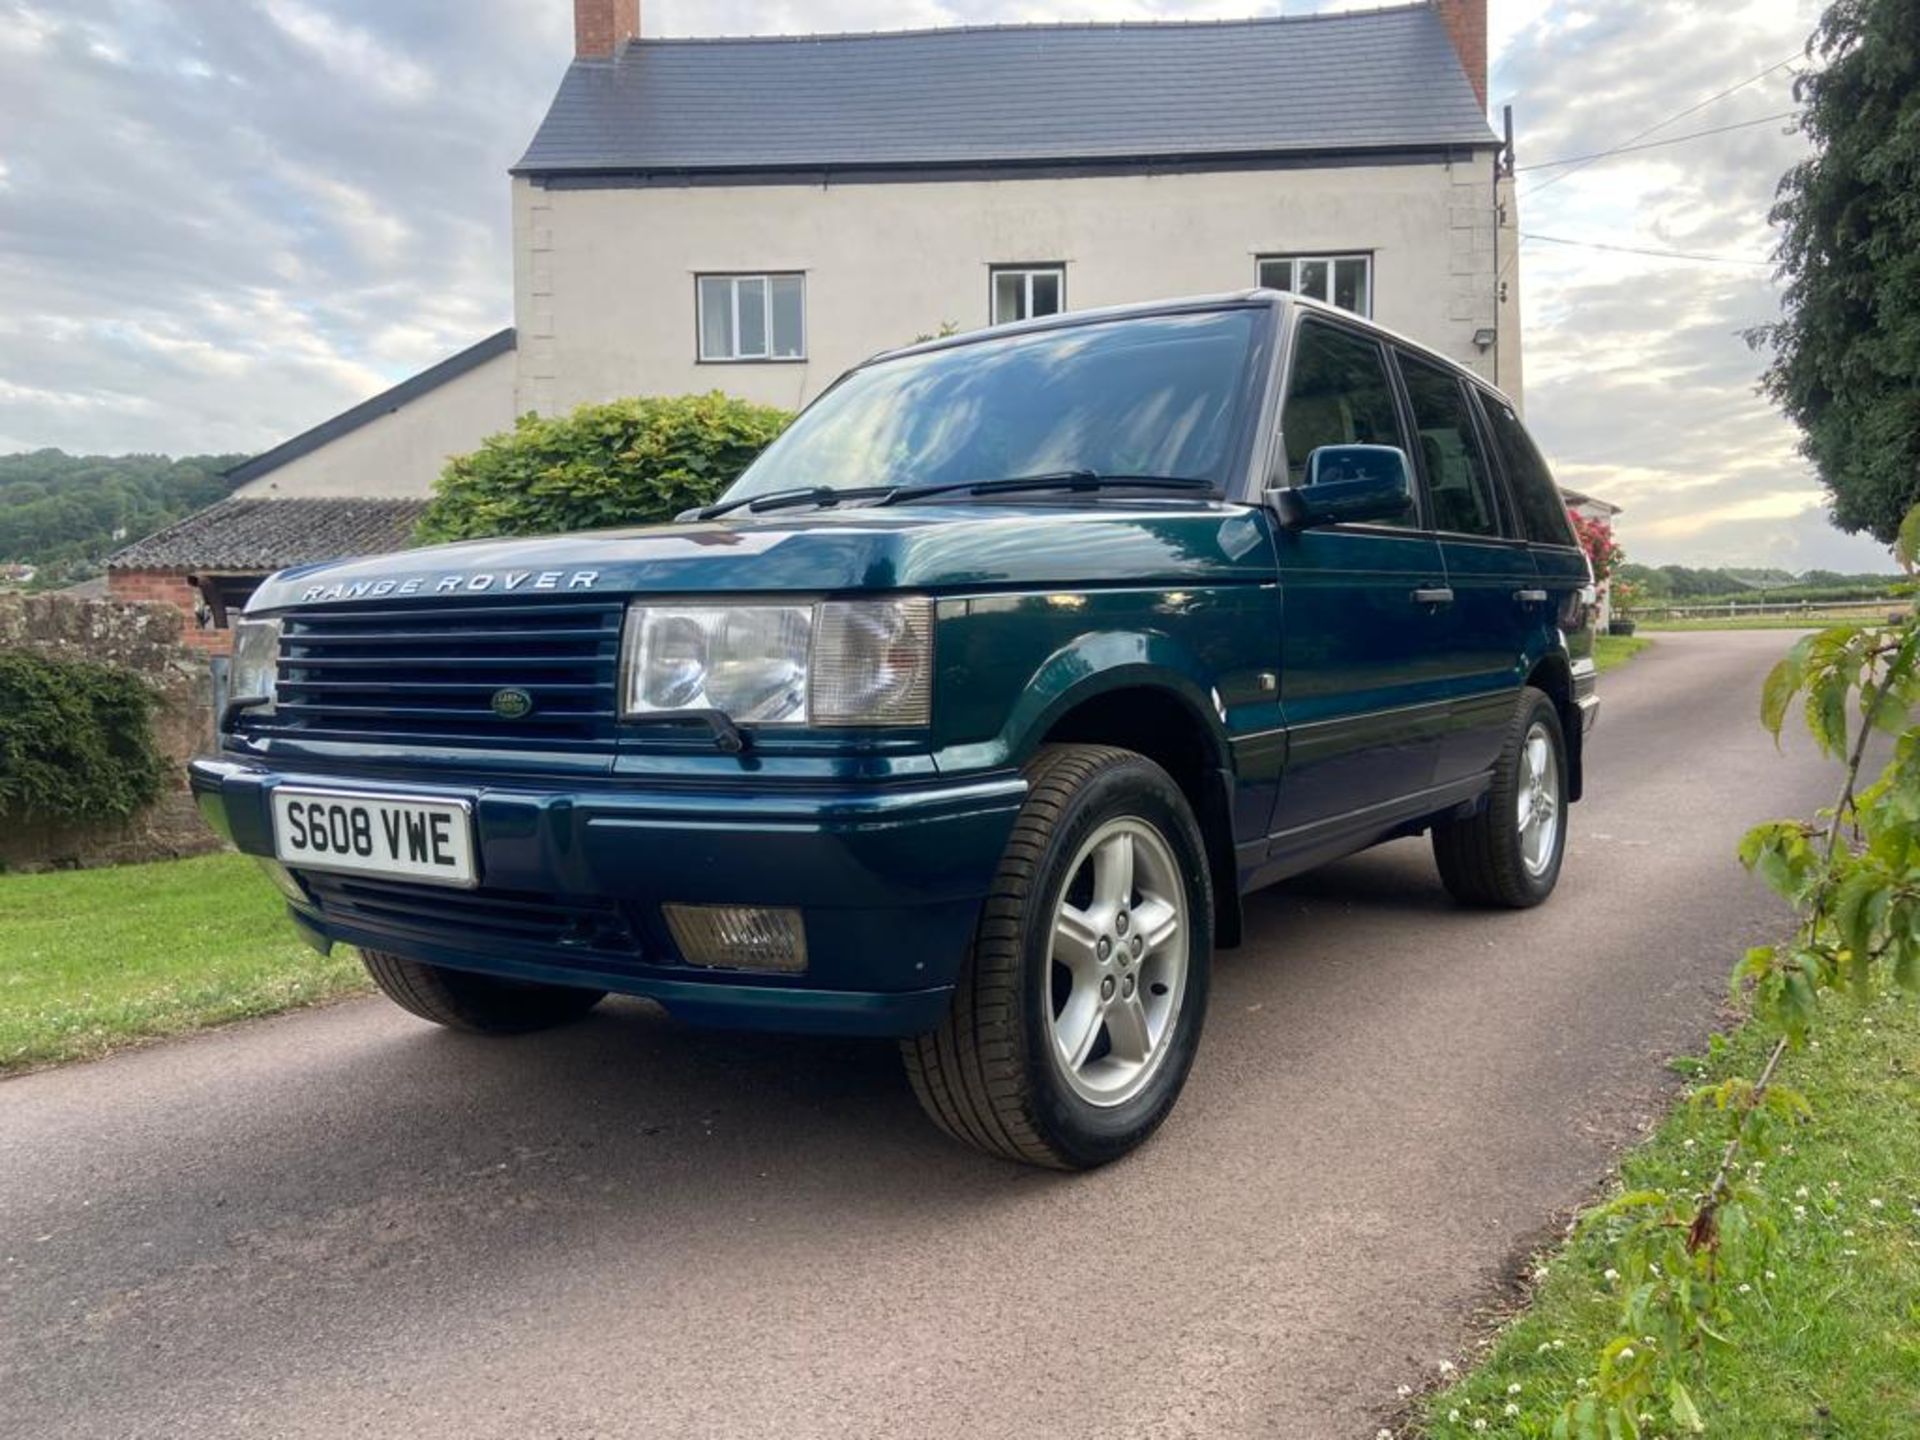 1998 Limited Edition Range Rover P38 - Image 31 of 39